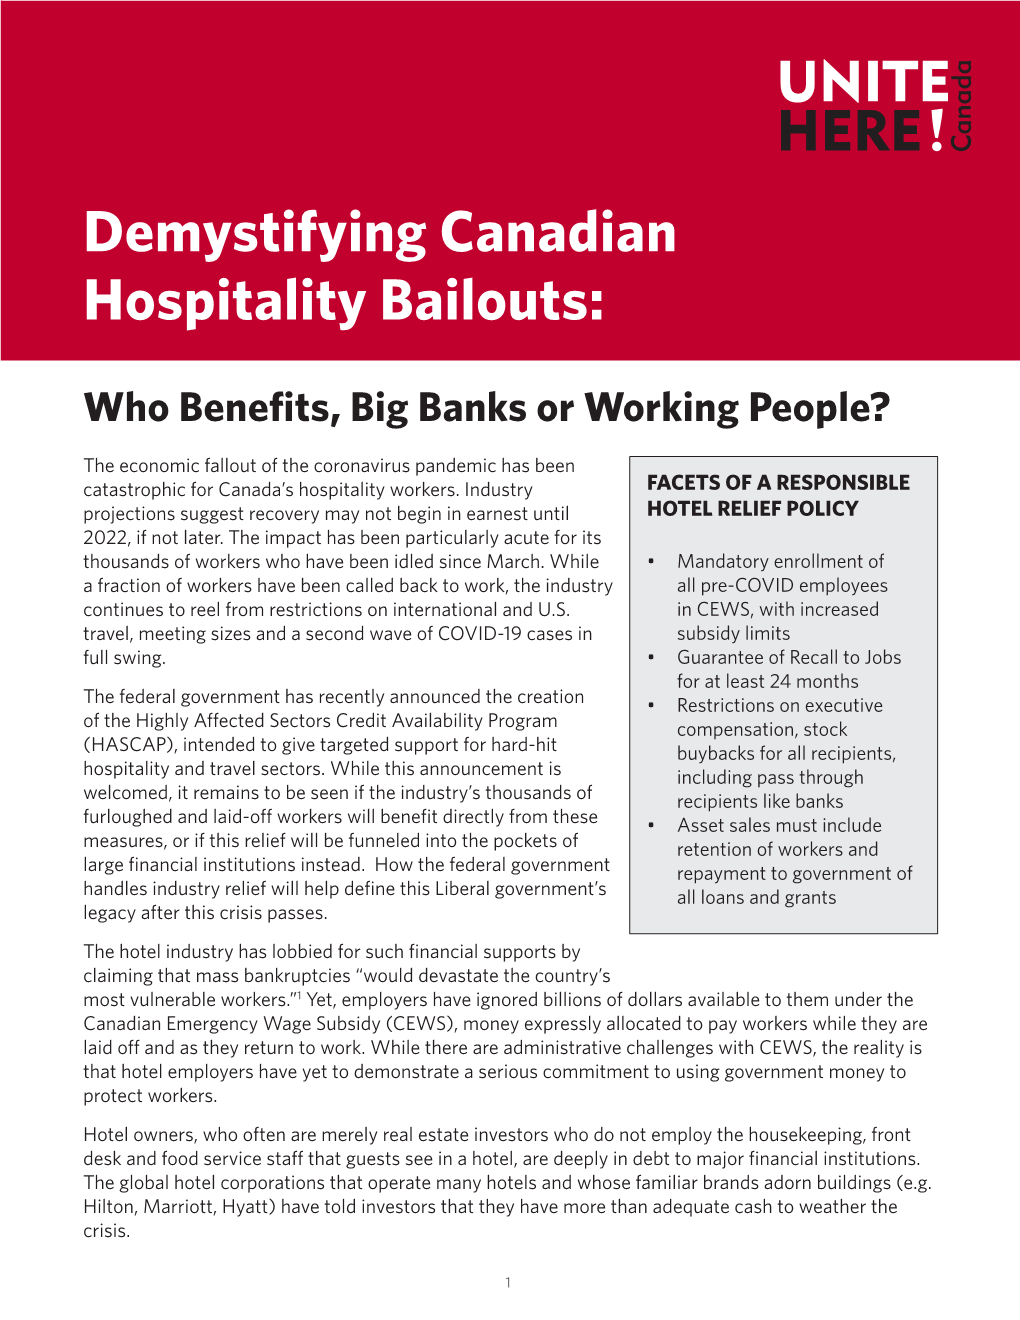 Demystifying Canadian Hospitality Bailouts